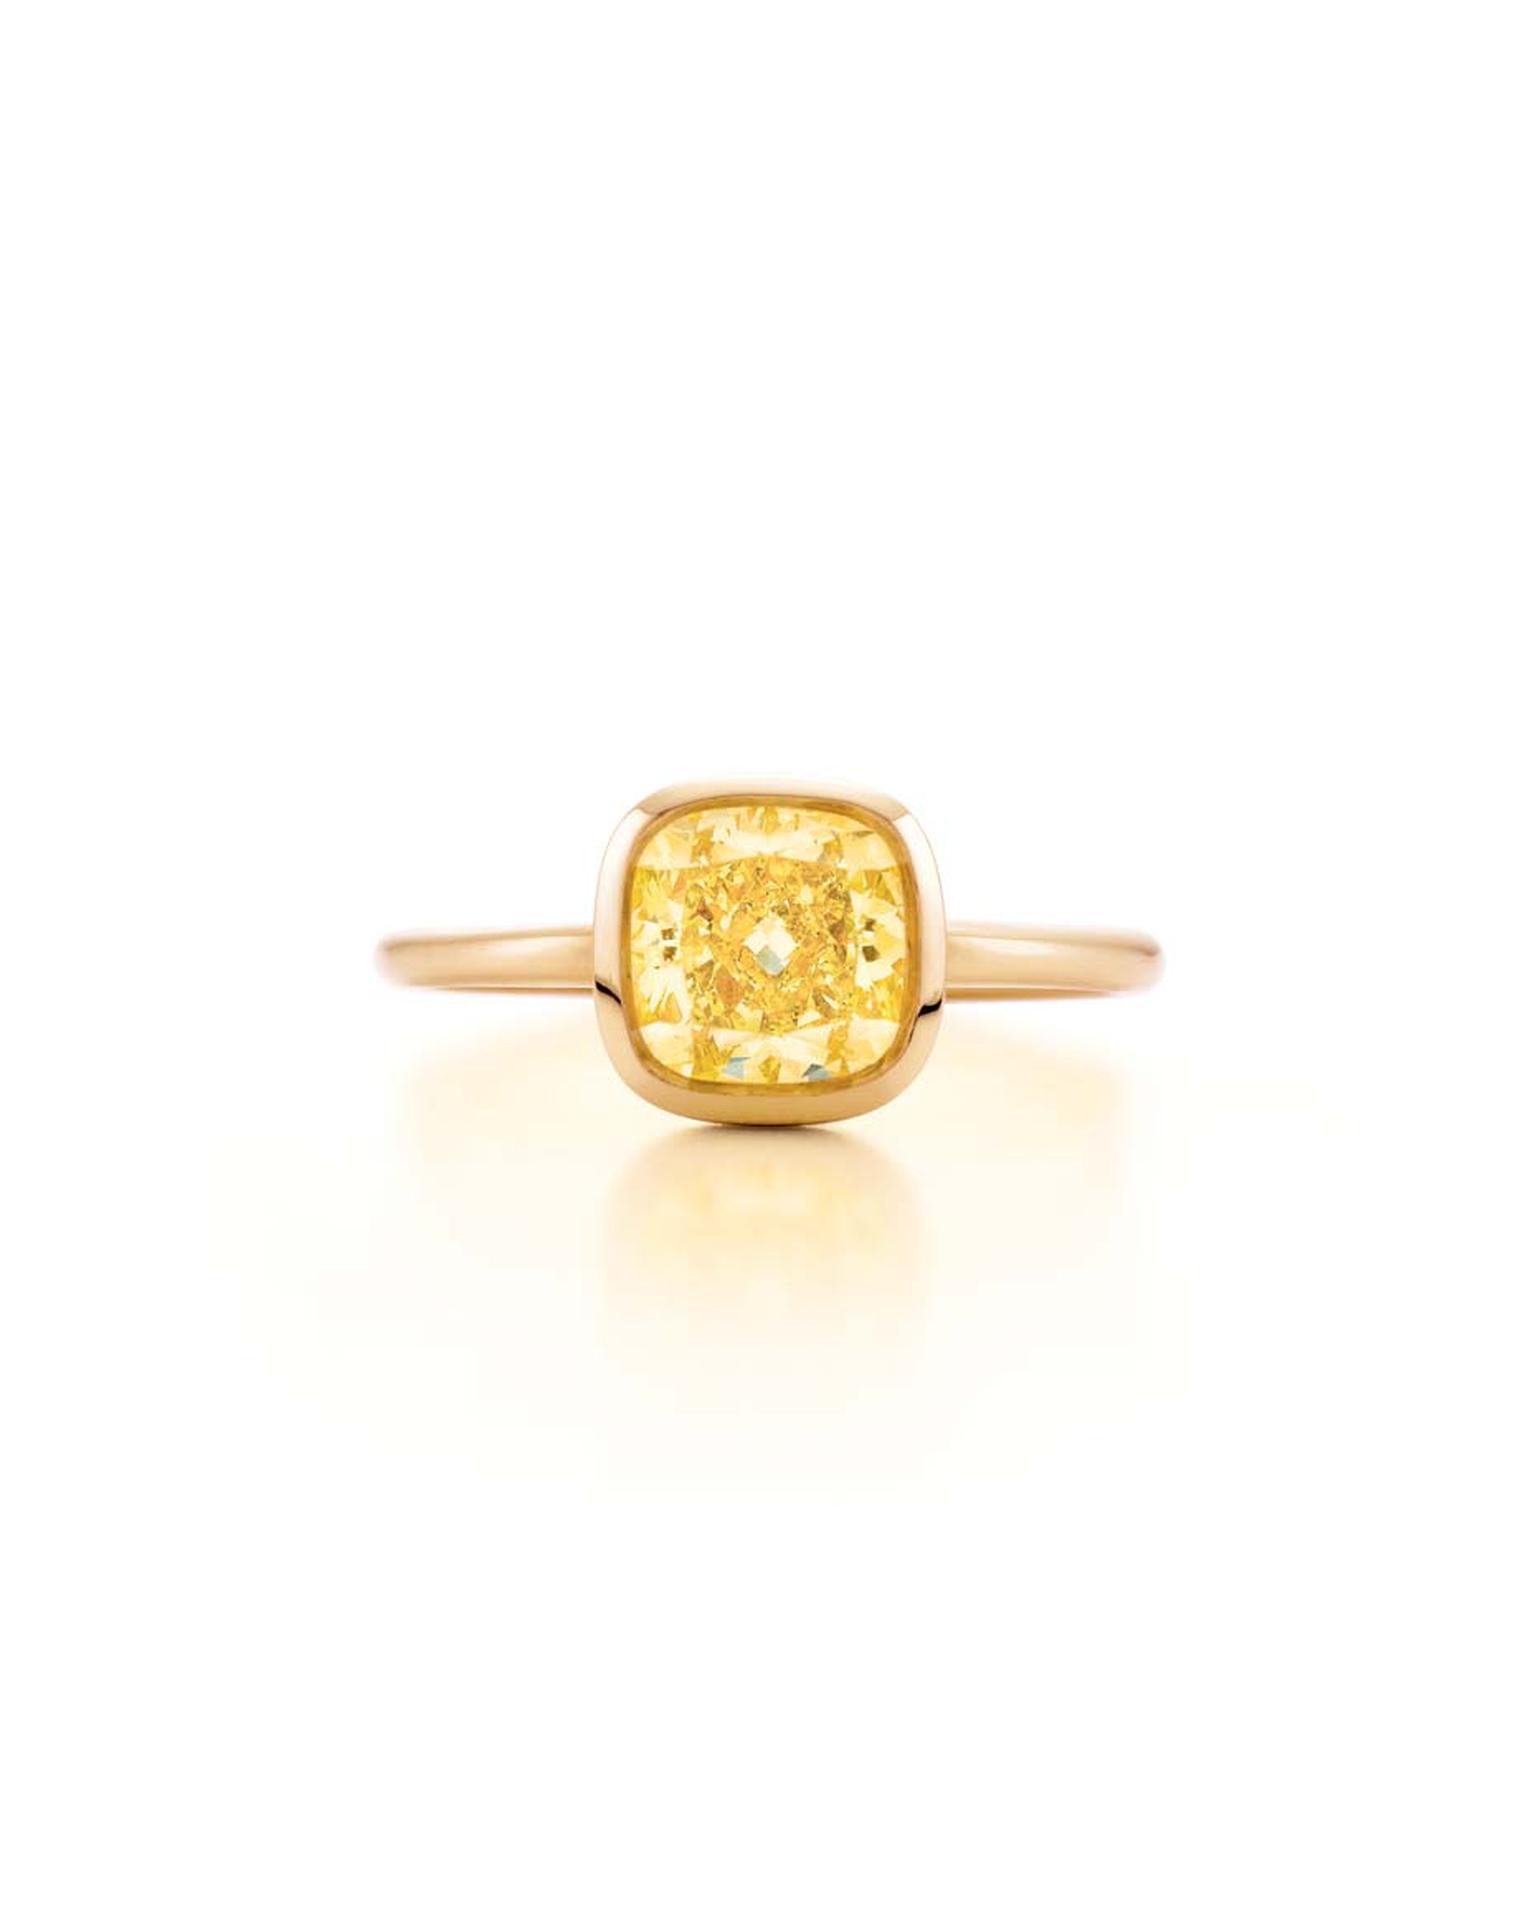 Tiffany cushion-cut yellow diamond engagement ring in pink gold (£POA)